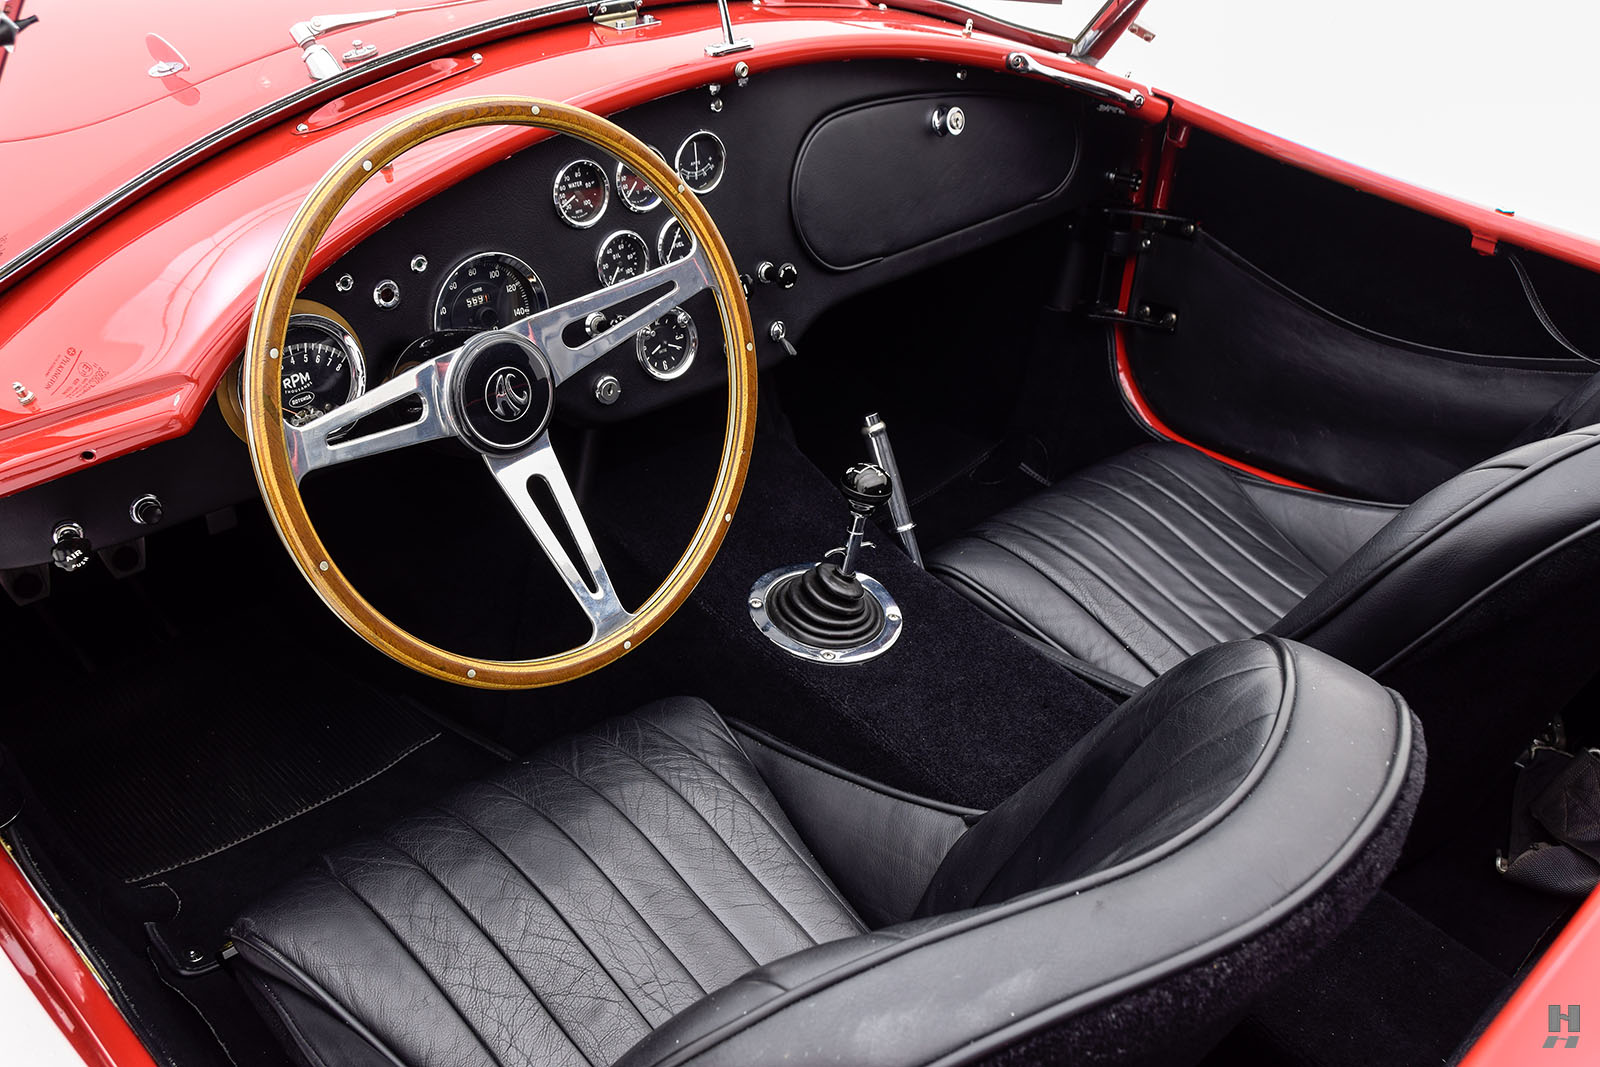 1965 shelby cobra 427 s/c completion